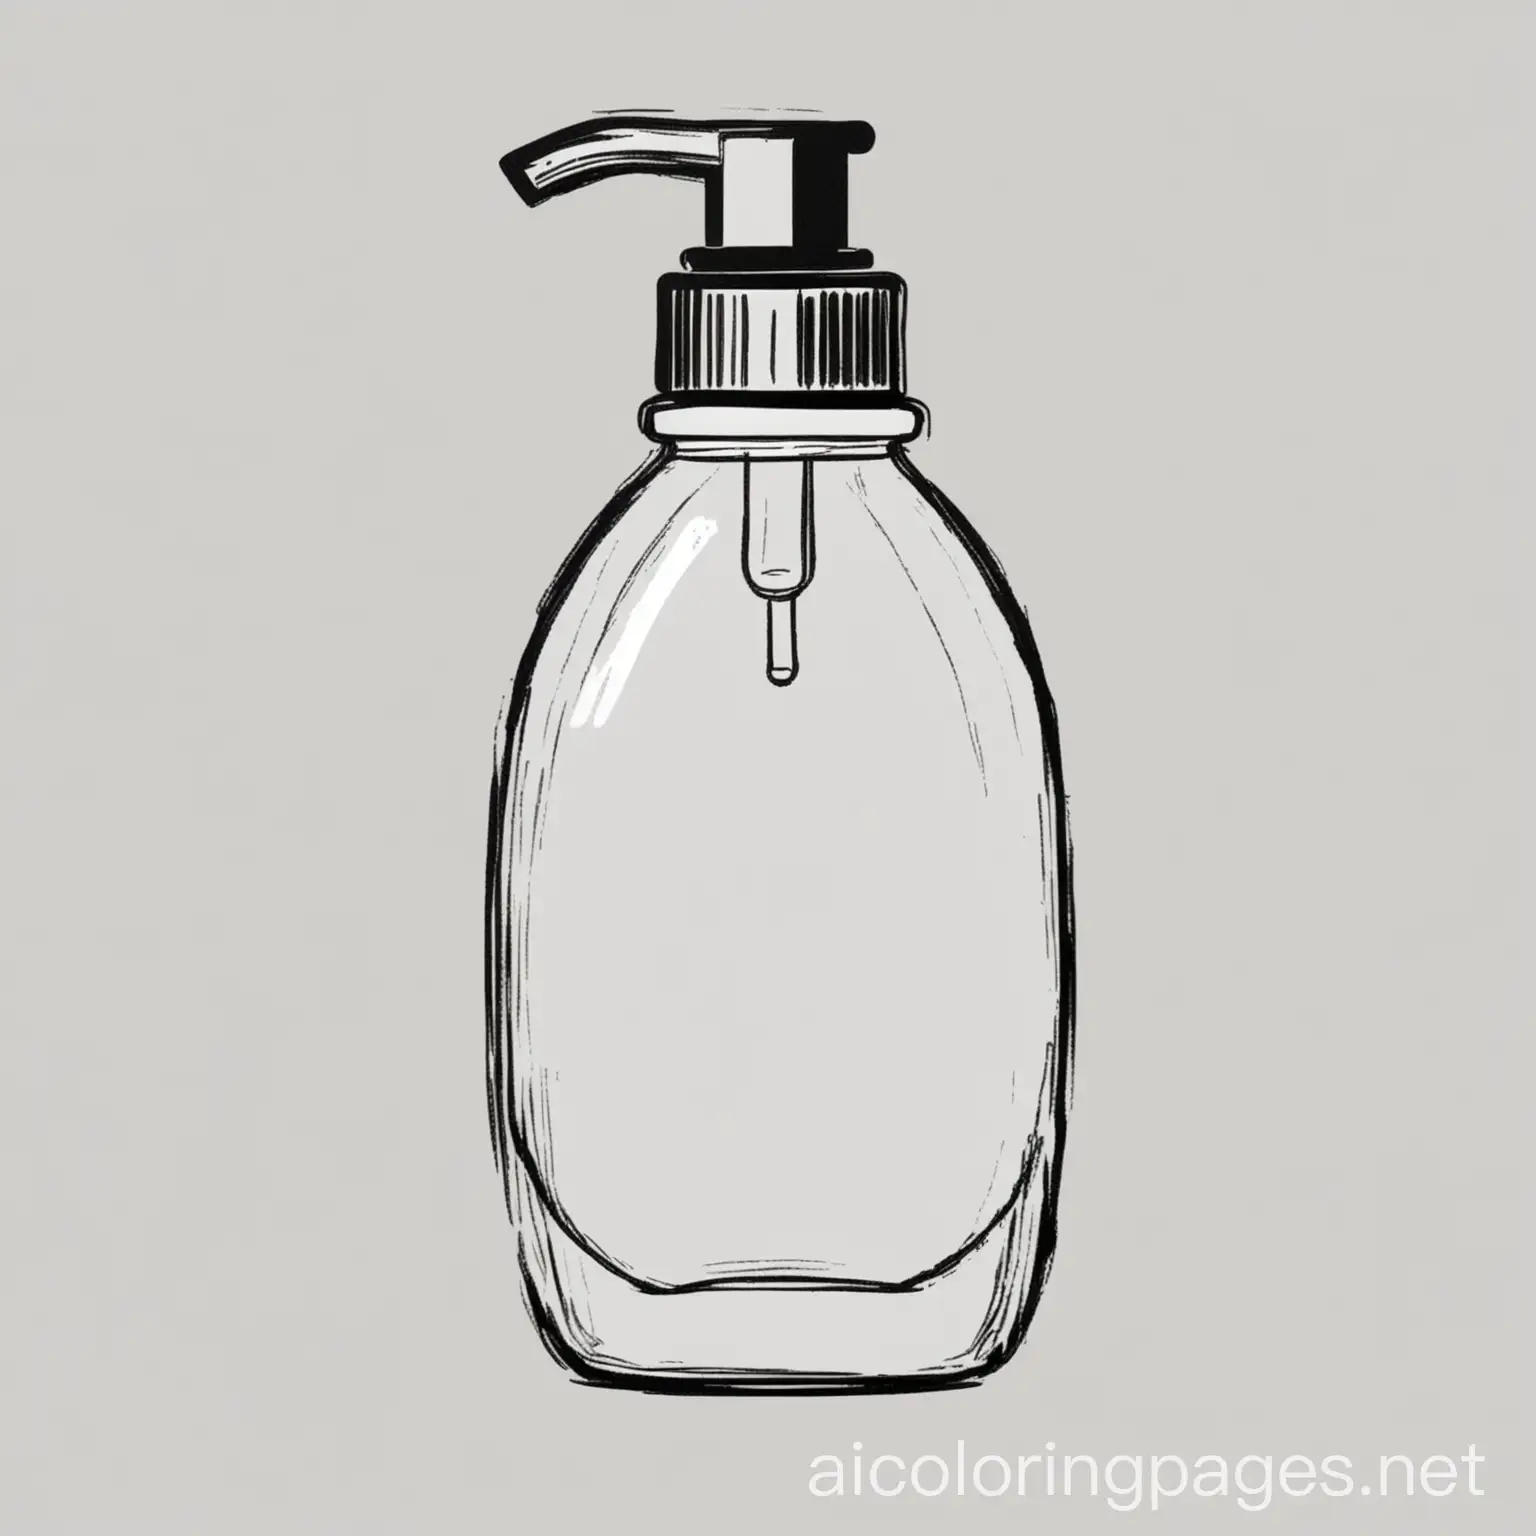 Illustrate a simple, black-and-white line drawing of a foundation bottle for a kids' coloring page. The bottle should have an oval body with a flat base and a squeeze nozzle on top. Use bold, clean lines to outline the shape of the bottle and nozzle. Ensure the image is monochromatic, featuring only black lines on a white background, providing a smooth and user-friendly representation perfect for coloring., illustration, Coloring Page, black and white, line art, white background, Simplicity, Ample White Space.